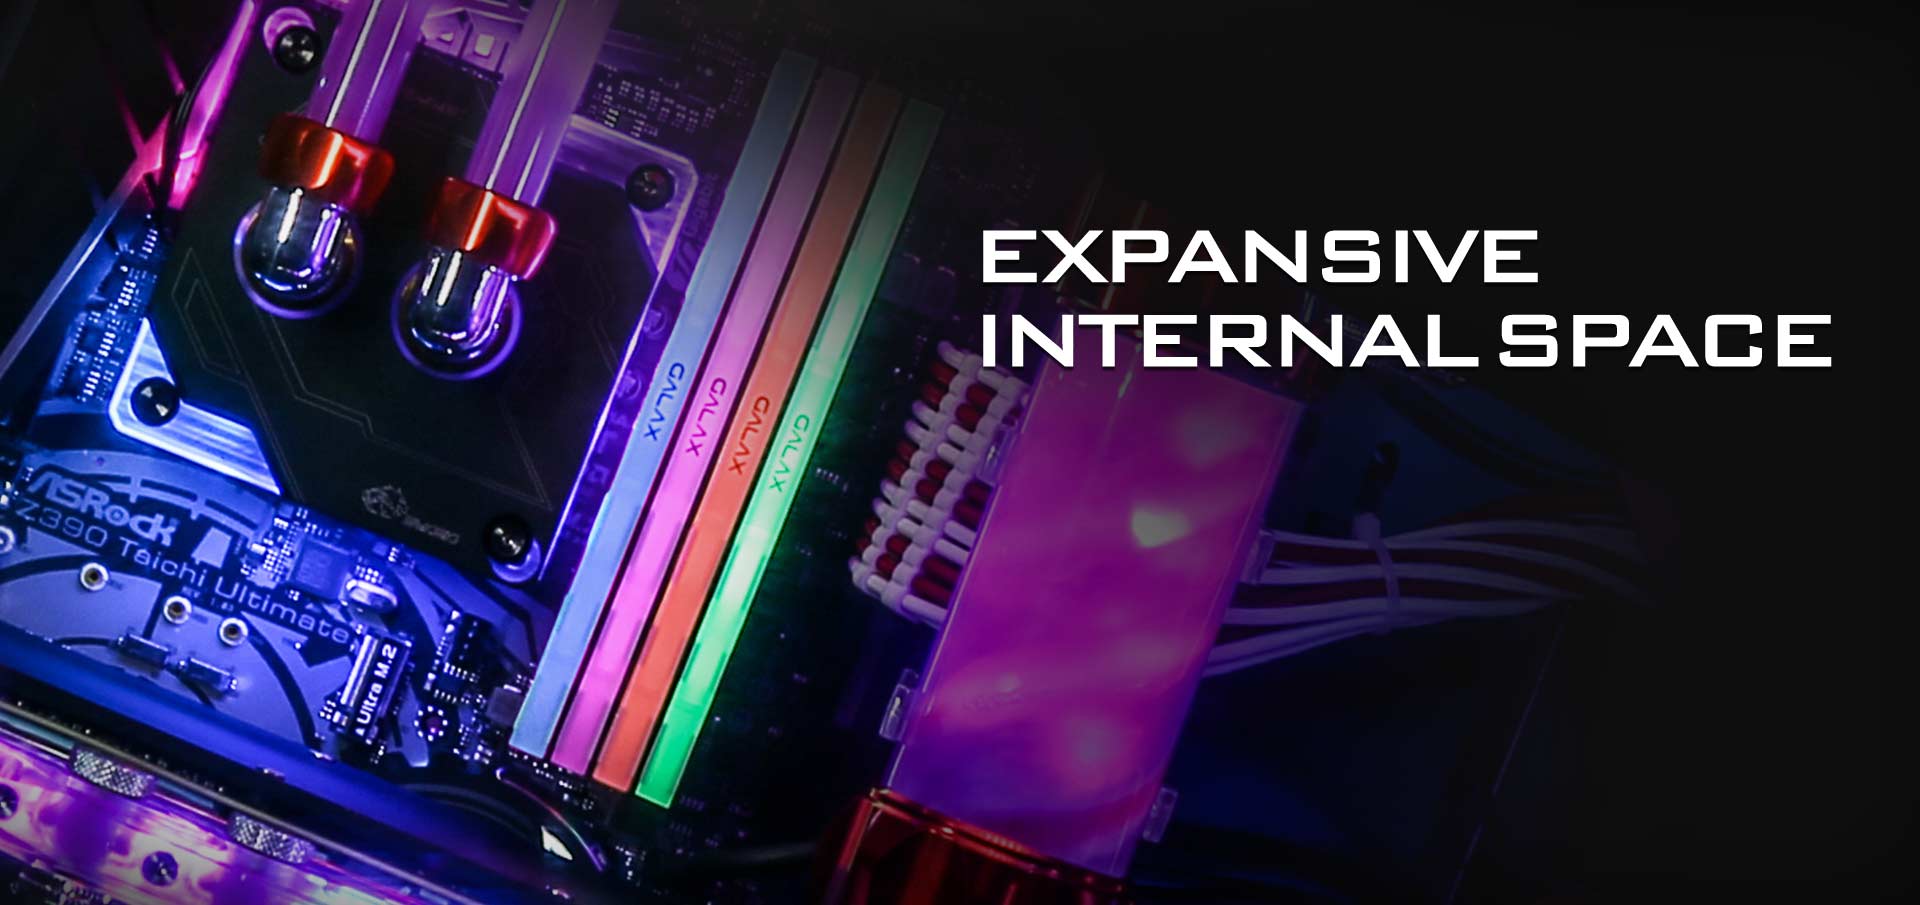 Closeup of a Water-Cooled CPU on a Motherboard Next to RGB-Lit Memory. Header Text Reads: EXPANSIVE INTERNAL SPACE